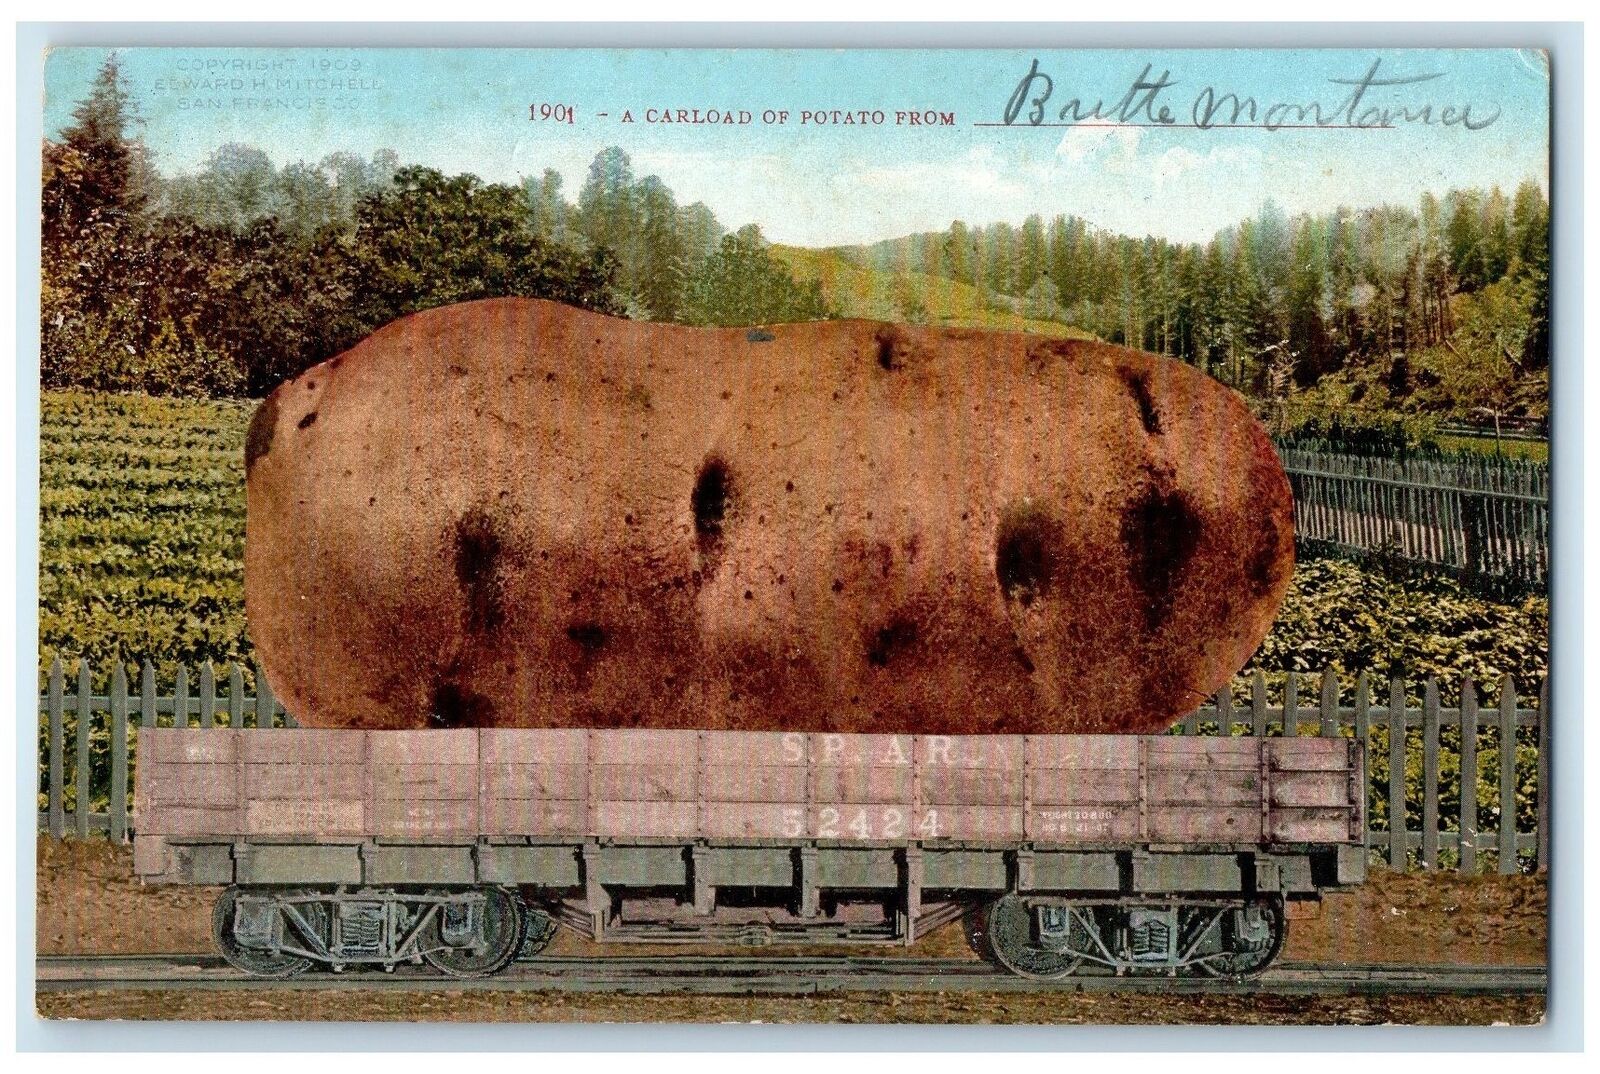 c1910s A Carload Of Exaggerated Potato From Brutte Montana MT Posted Postcard